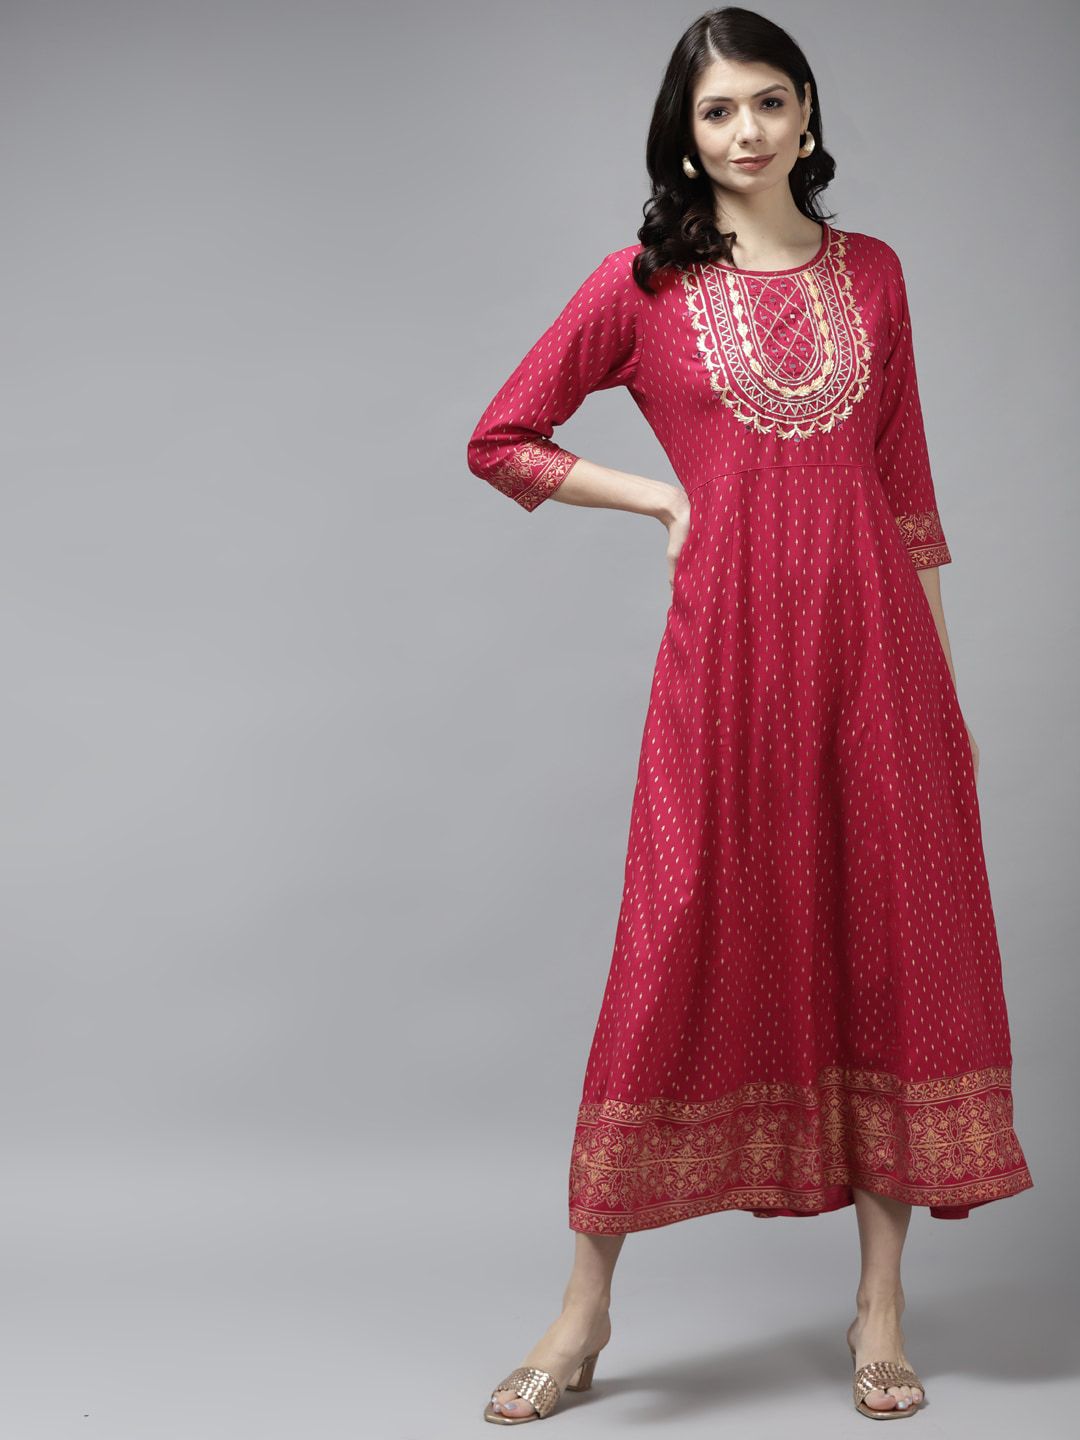 Yufta Red Ethnic Motifs Printed Embellished detailed Midi Fit & Flare Dress Price in India